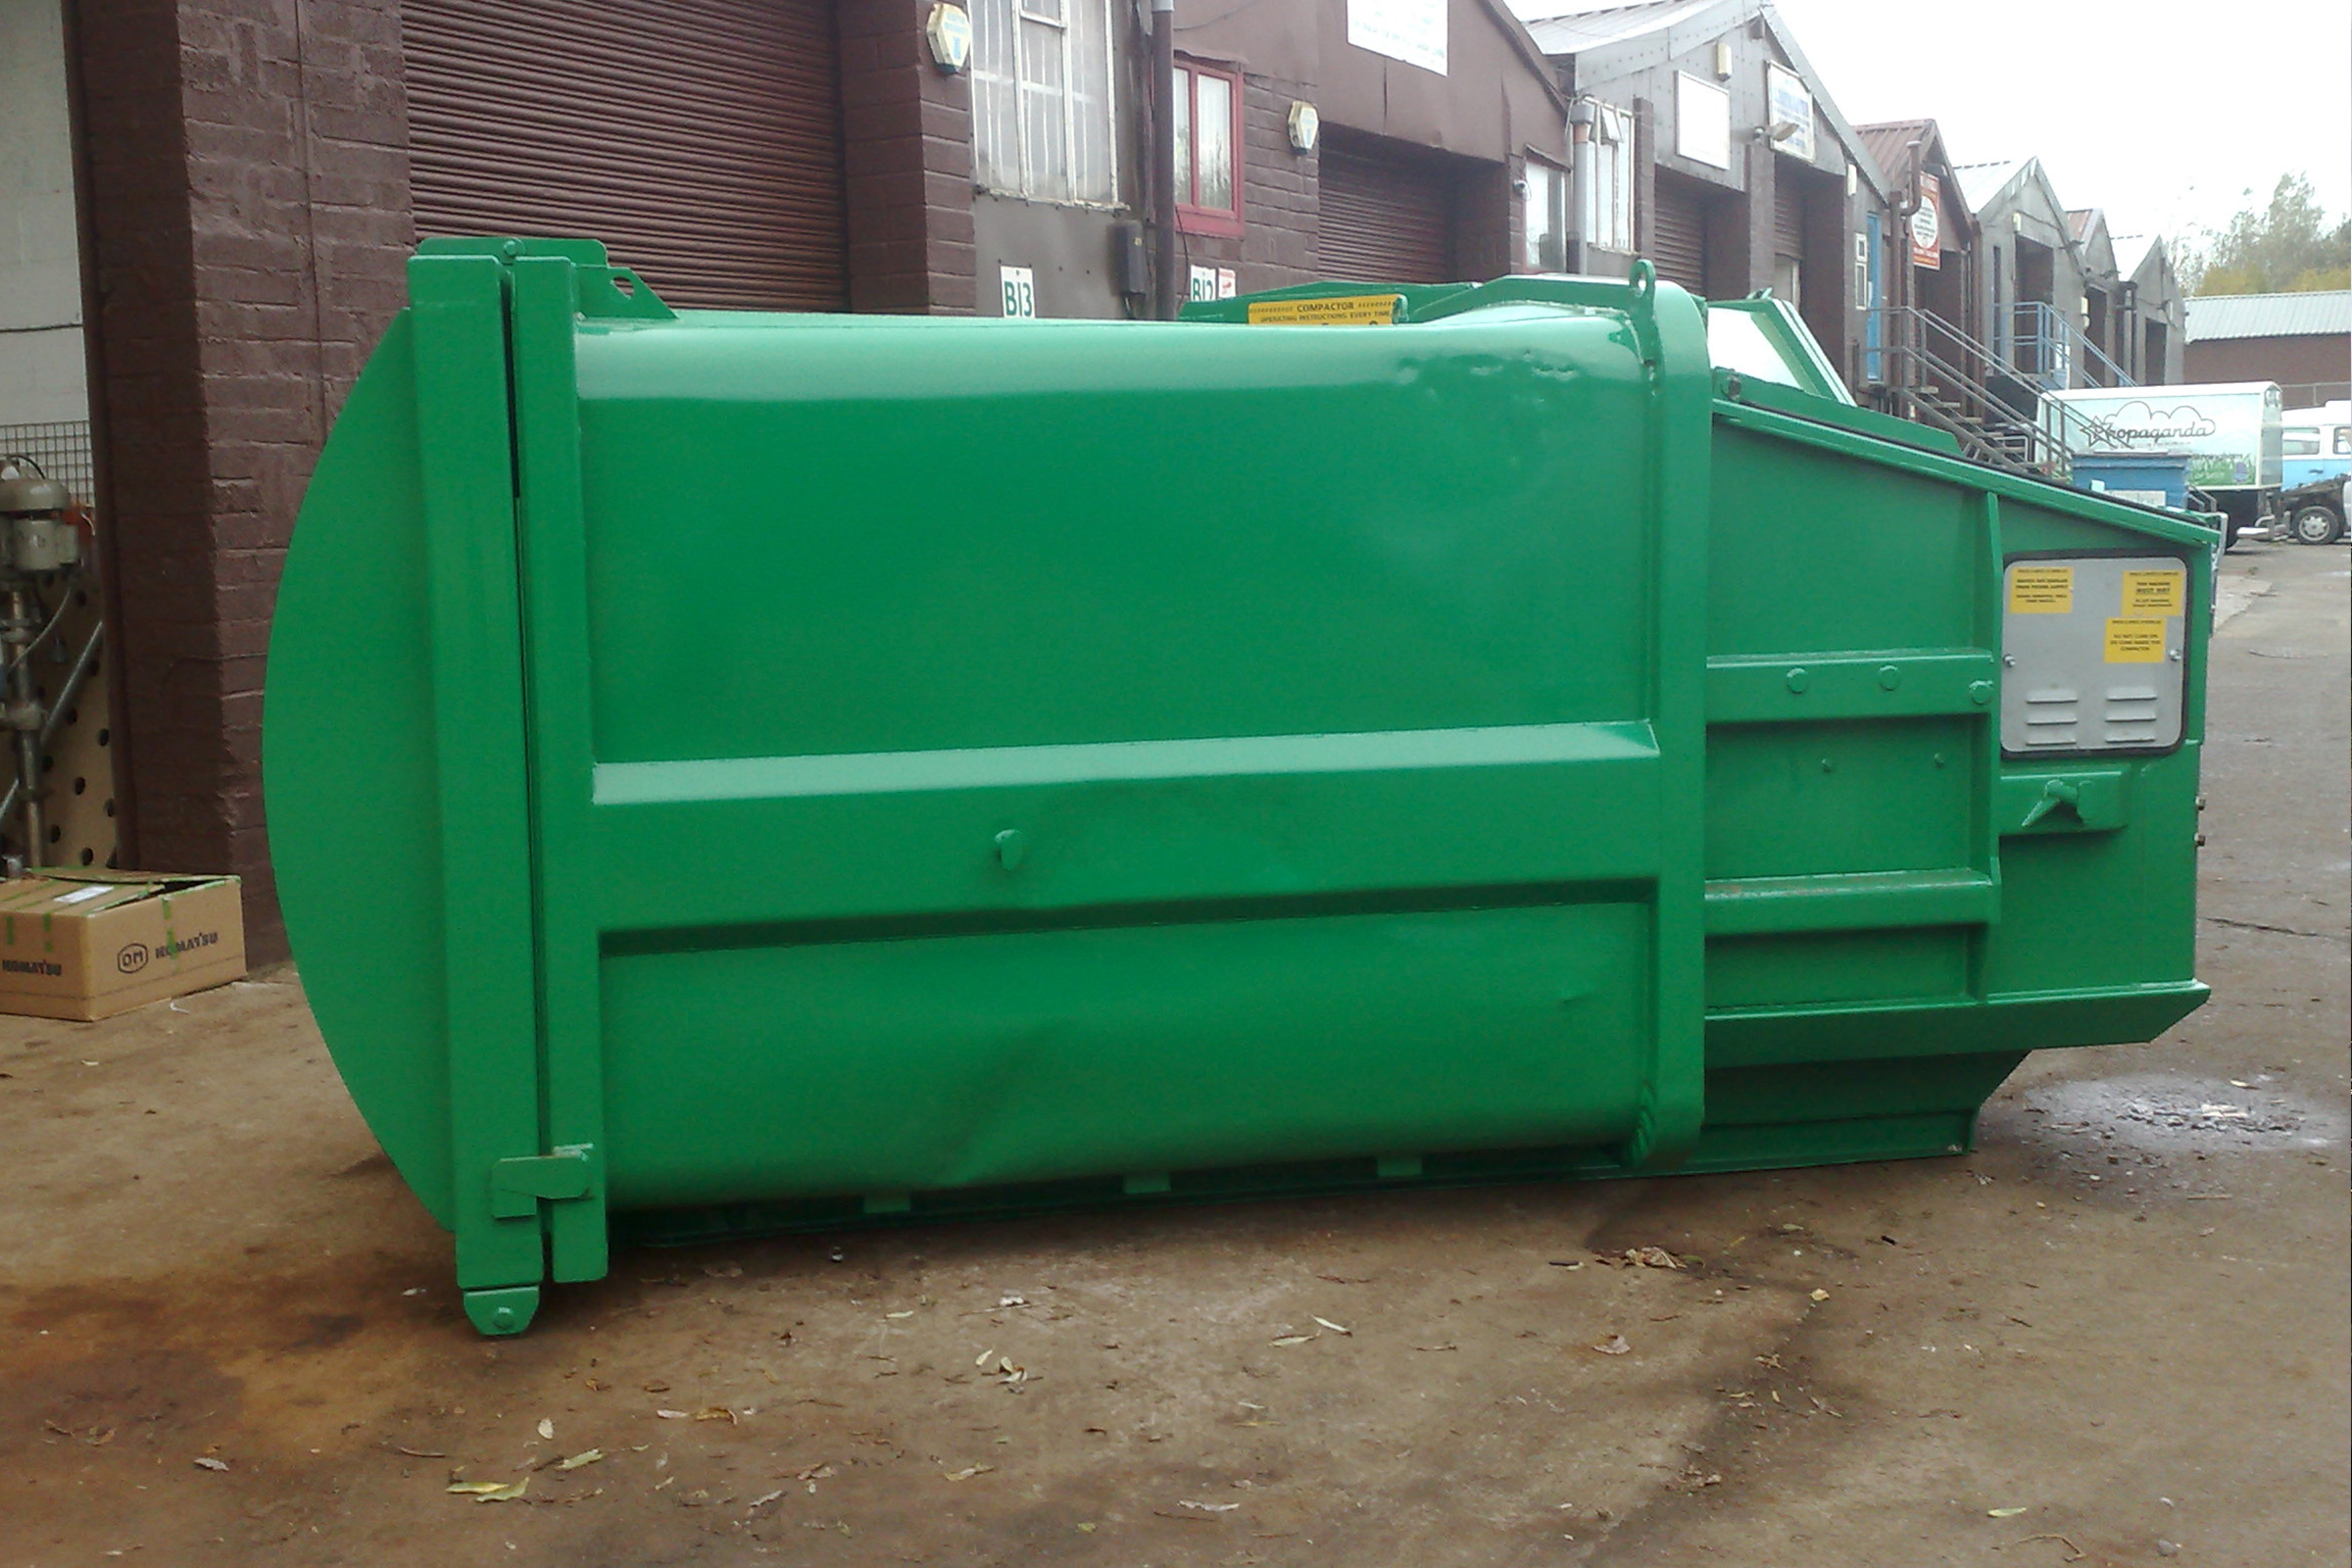 What is a Portable Compactor?